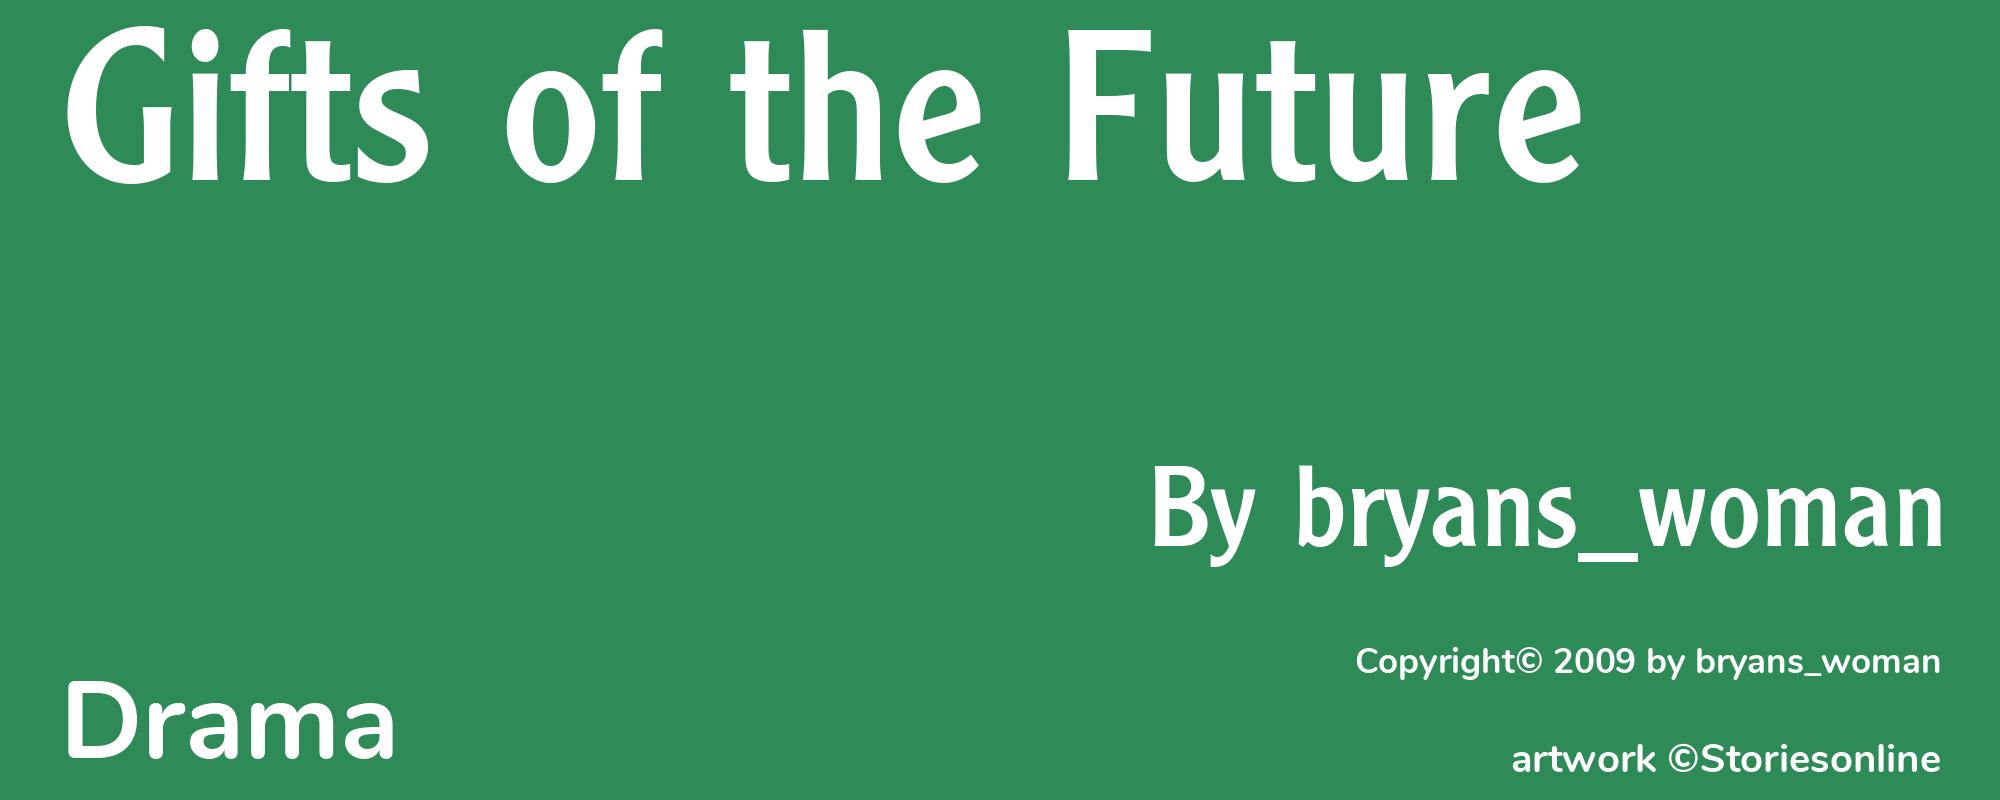 Gifts of the Future - Cover